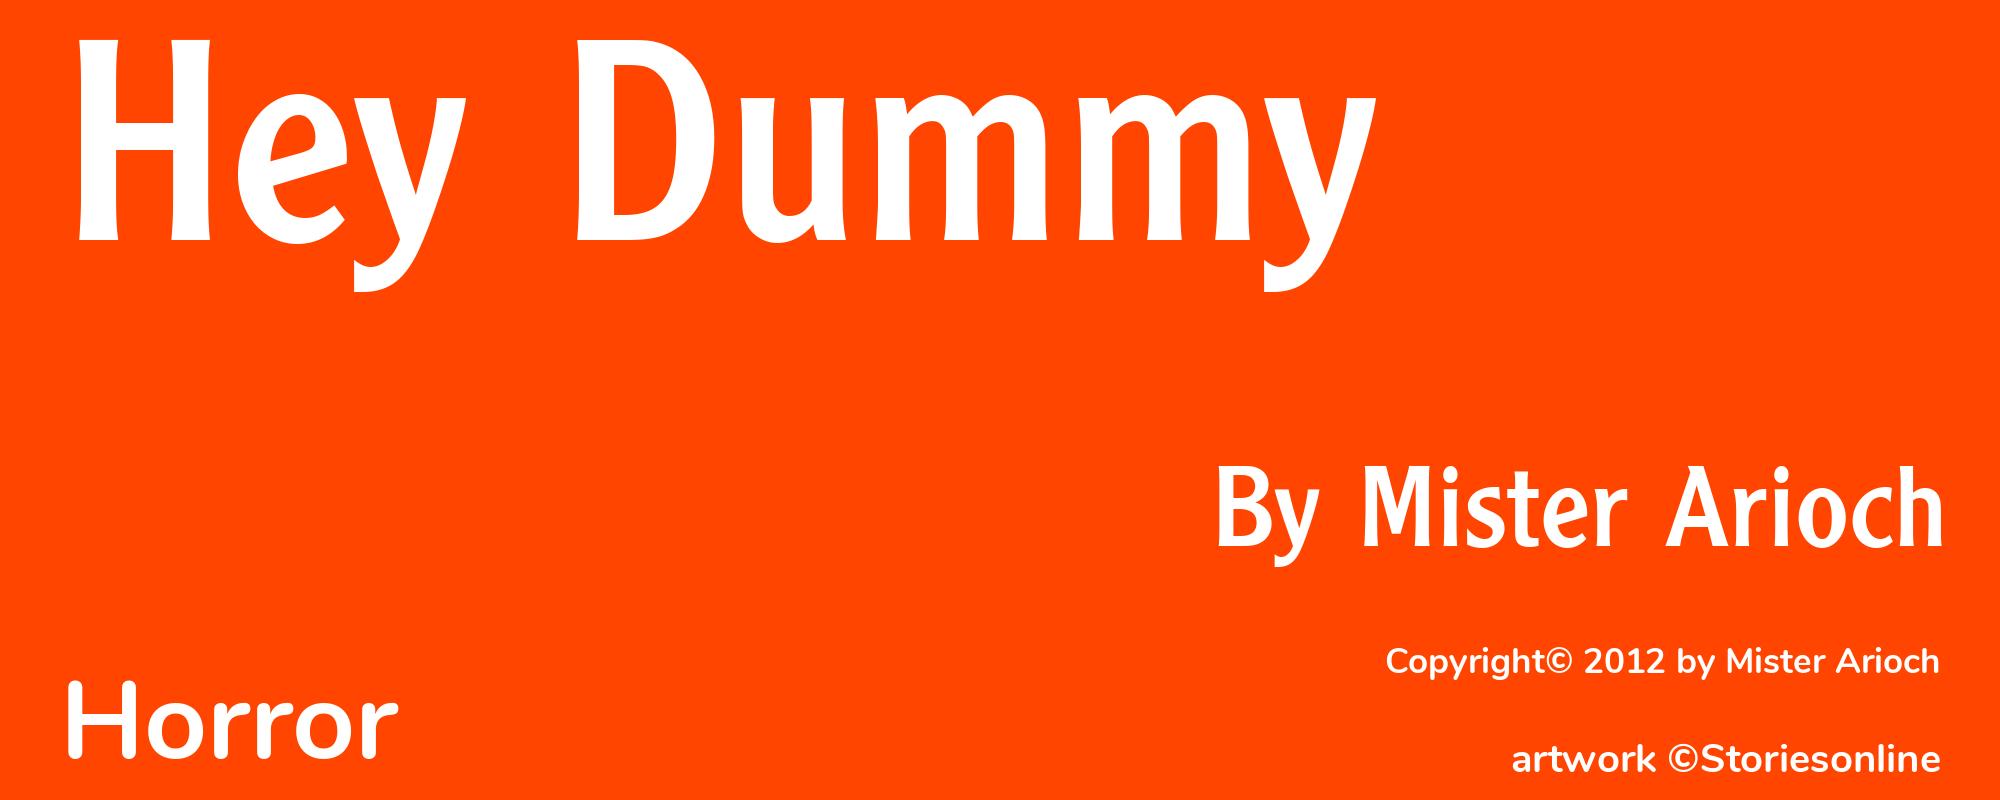 Hey Dummy - Cover